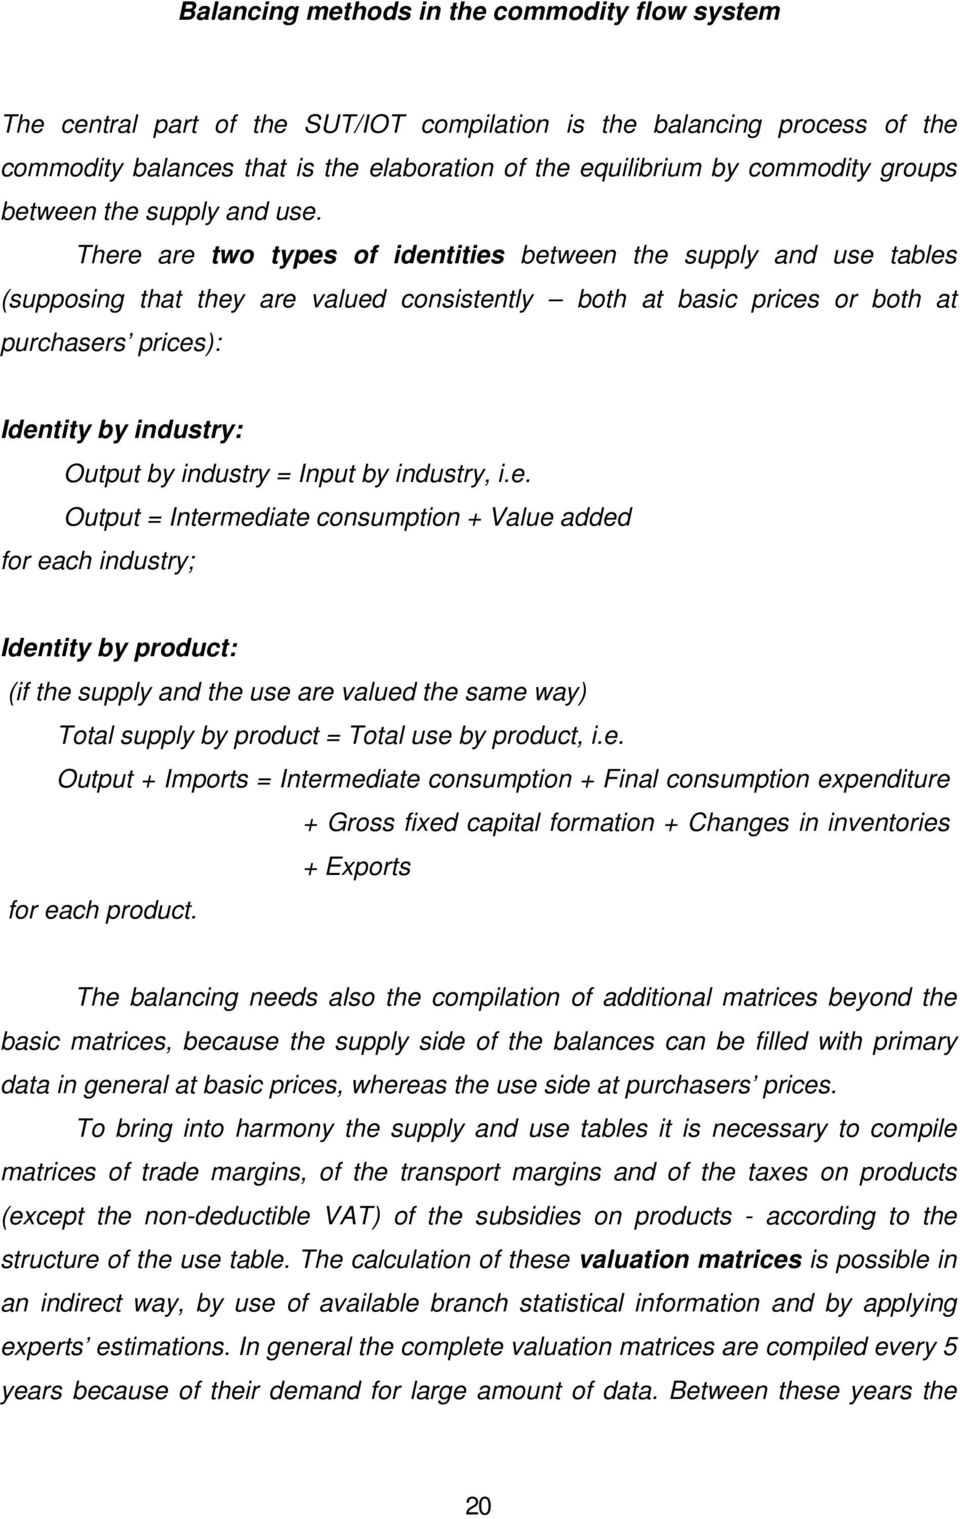 There are two types of identities between the supply and use tables (supposing that they are valued consistently both at basic prices or both at purchasers prices): Identity by industry: Output by